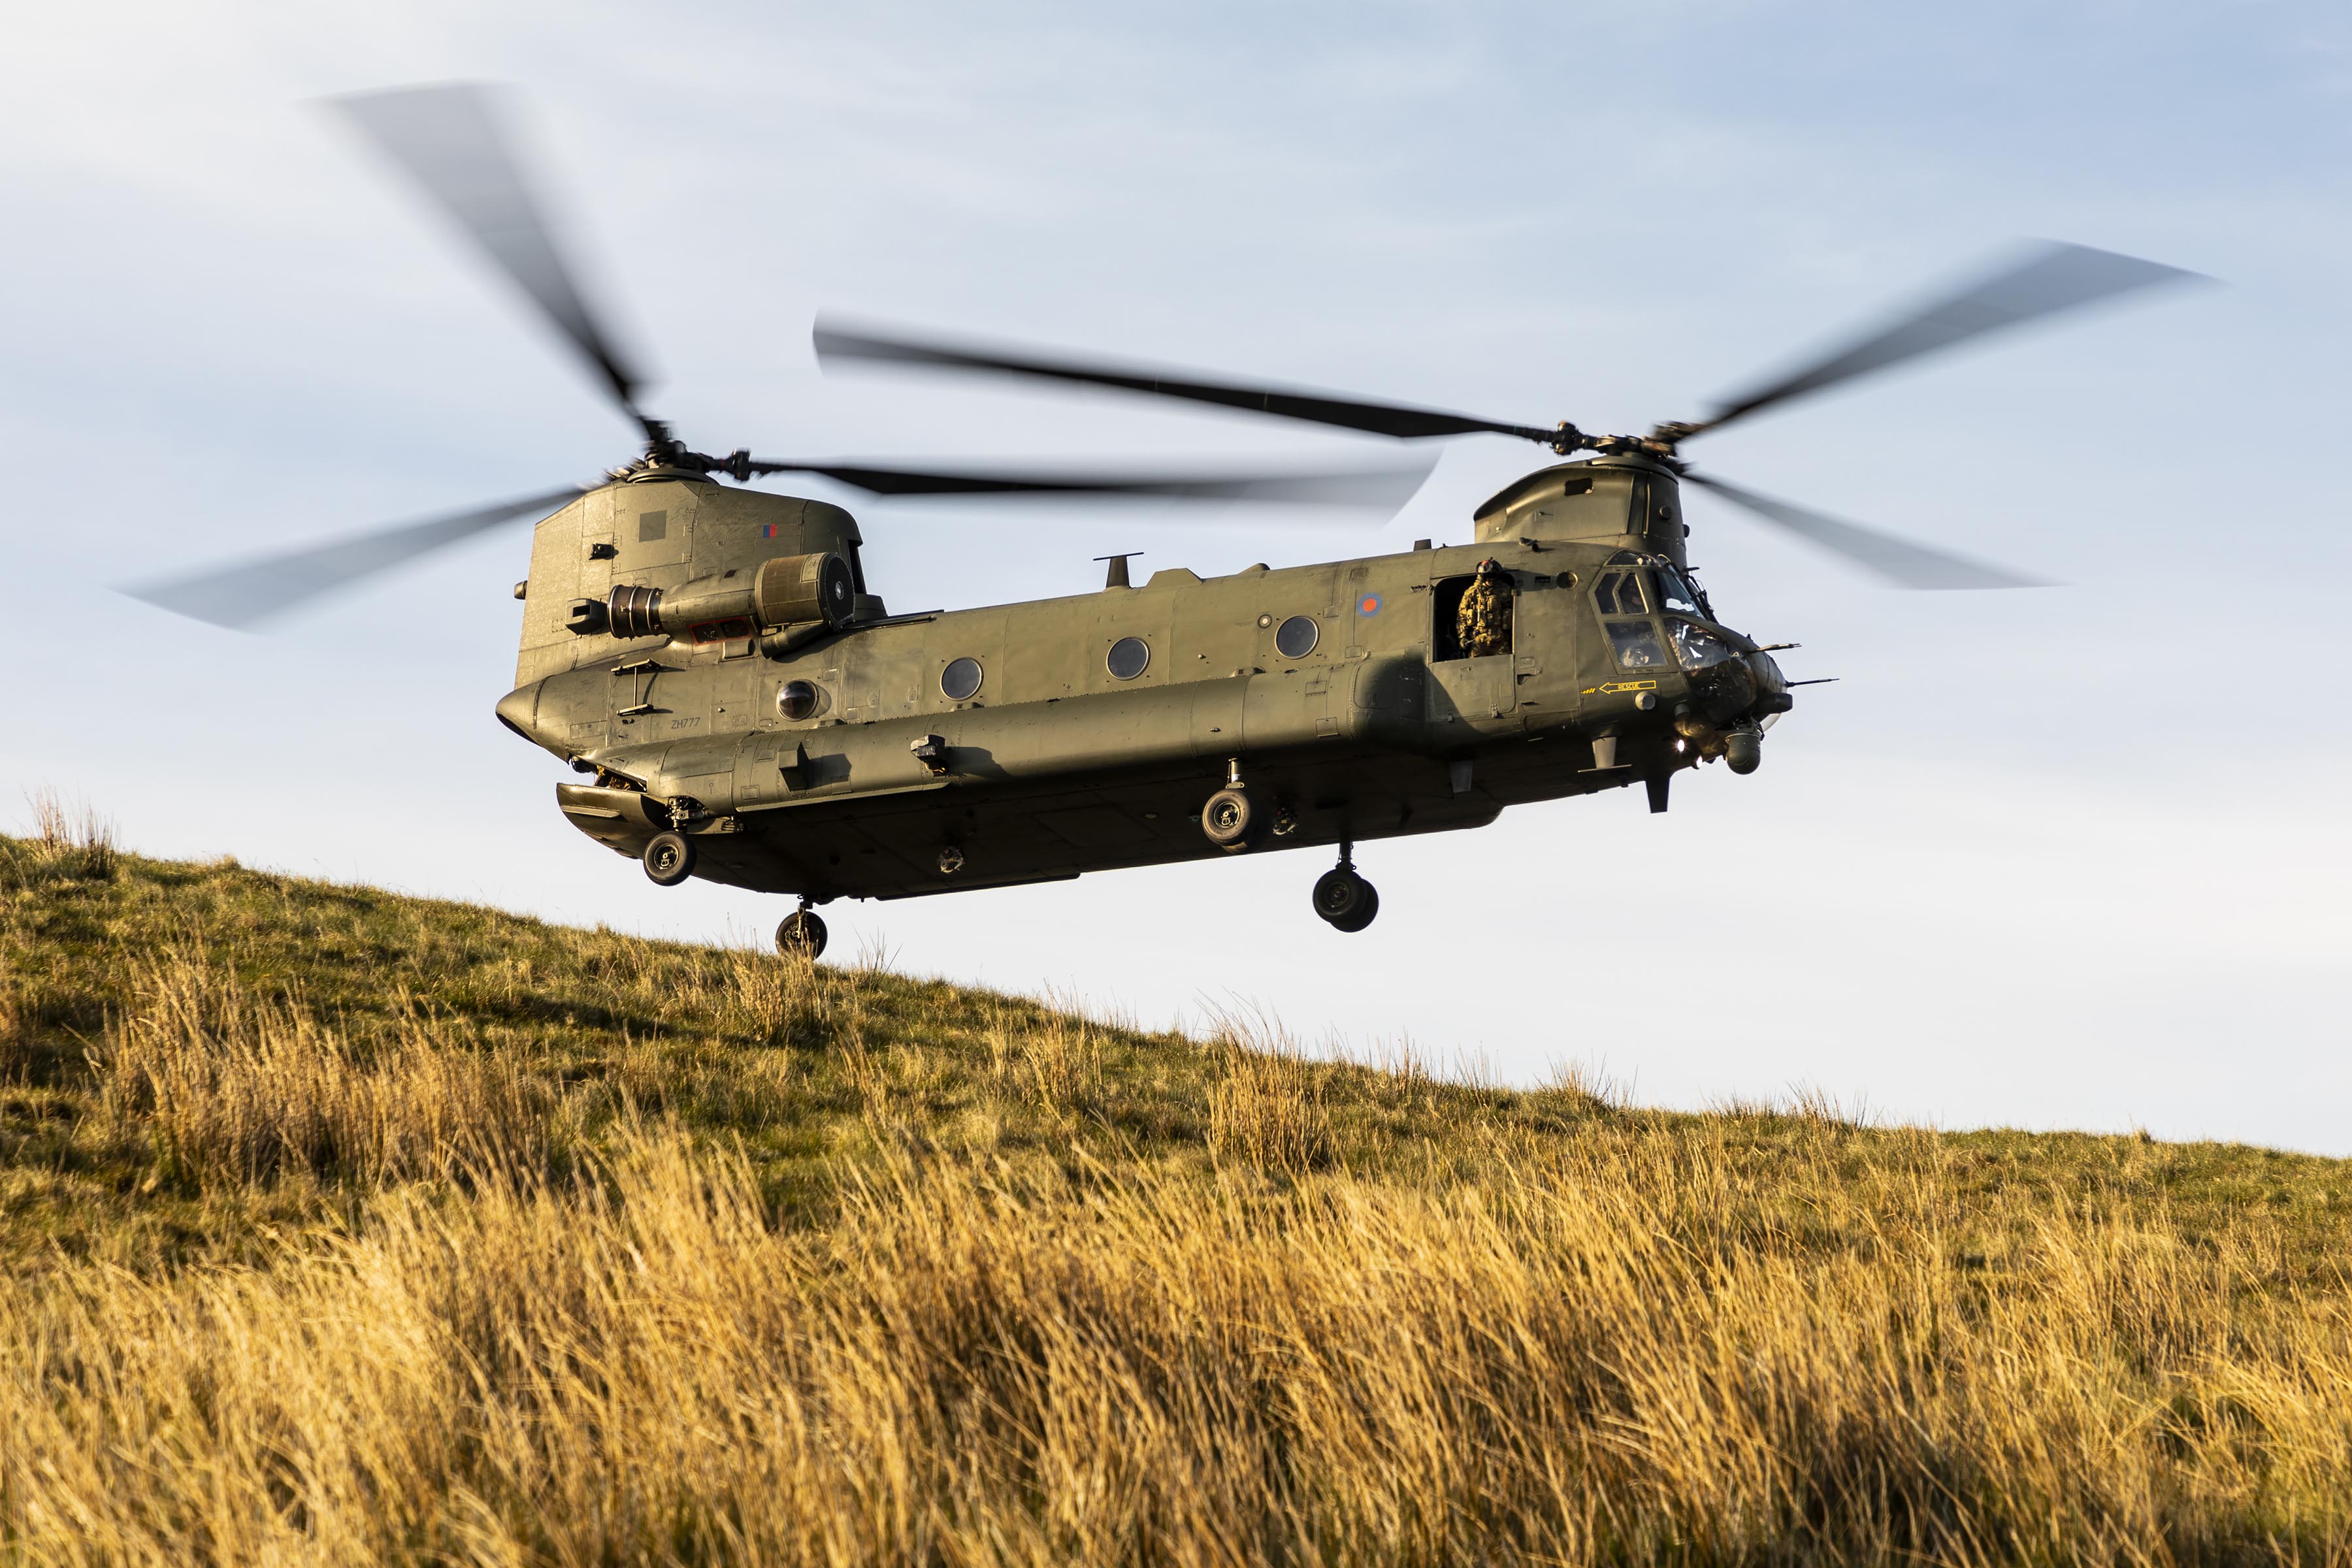 Image shows an RAF Chinook helicopter flying.